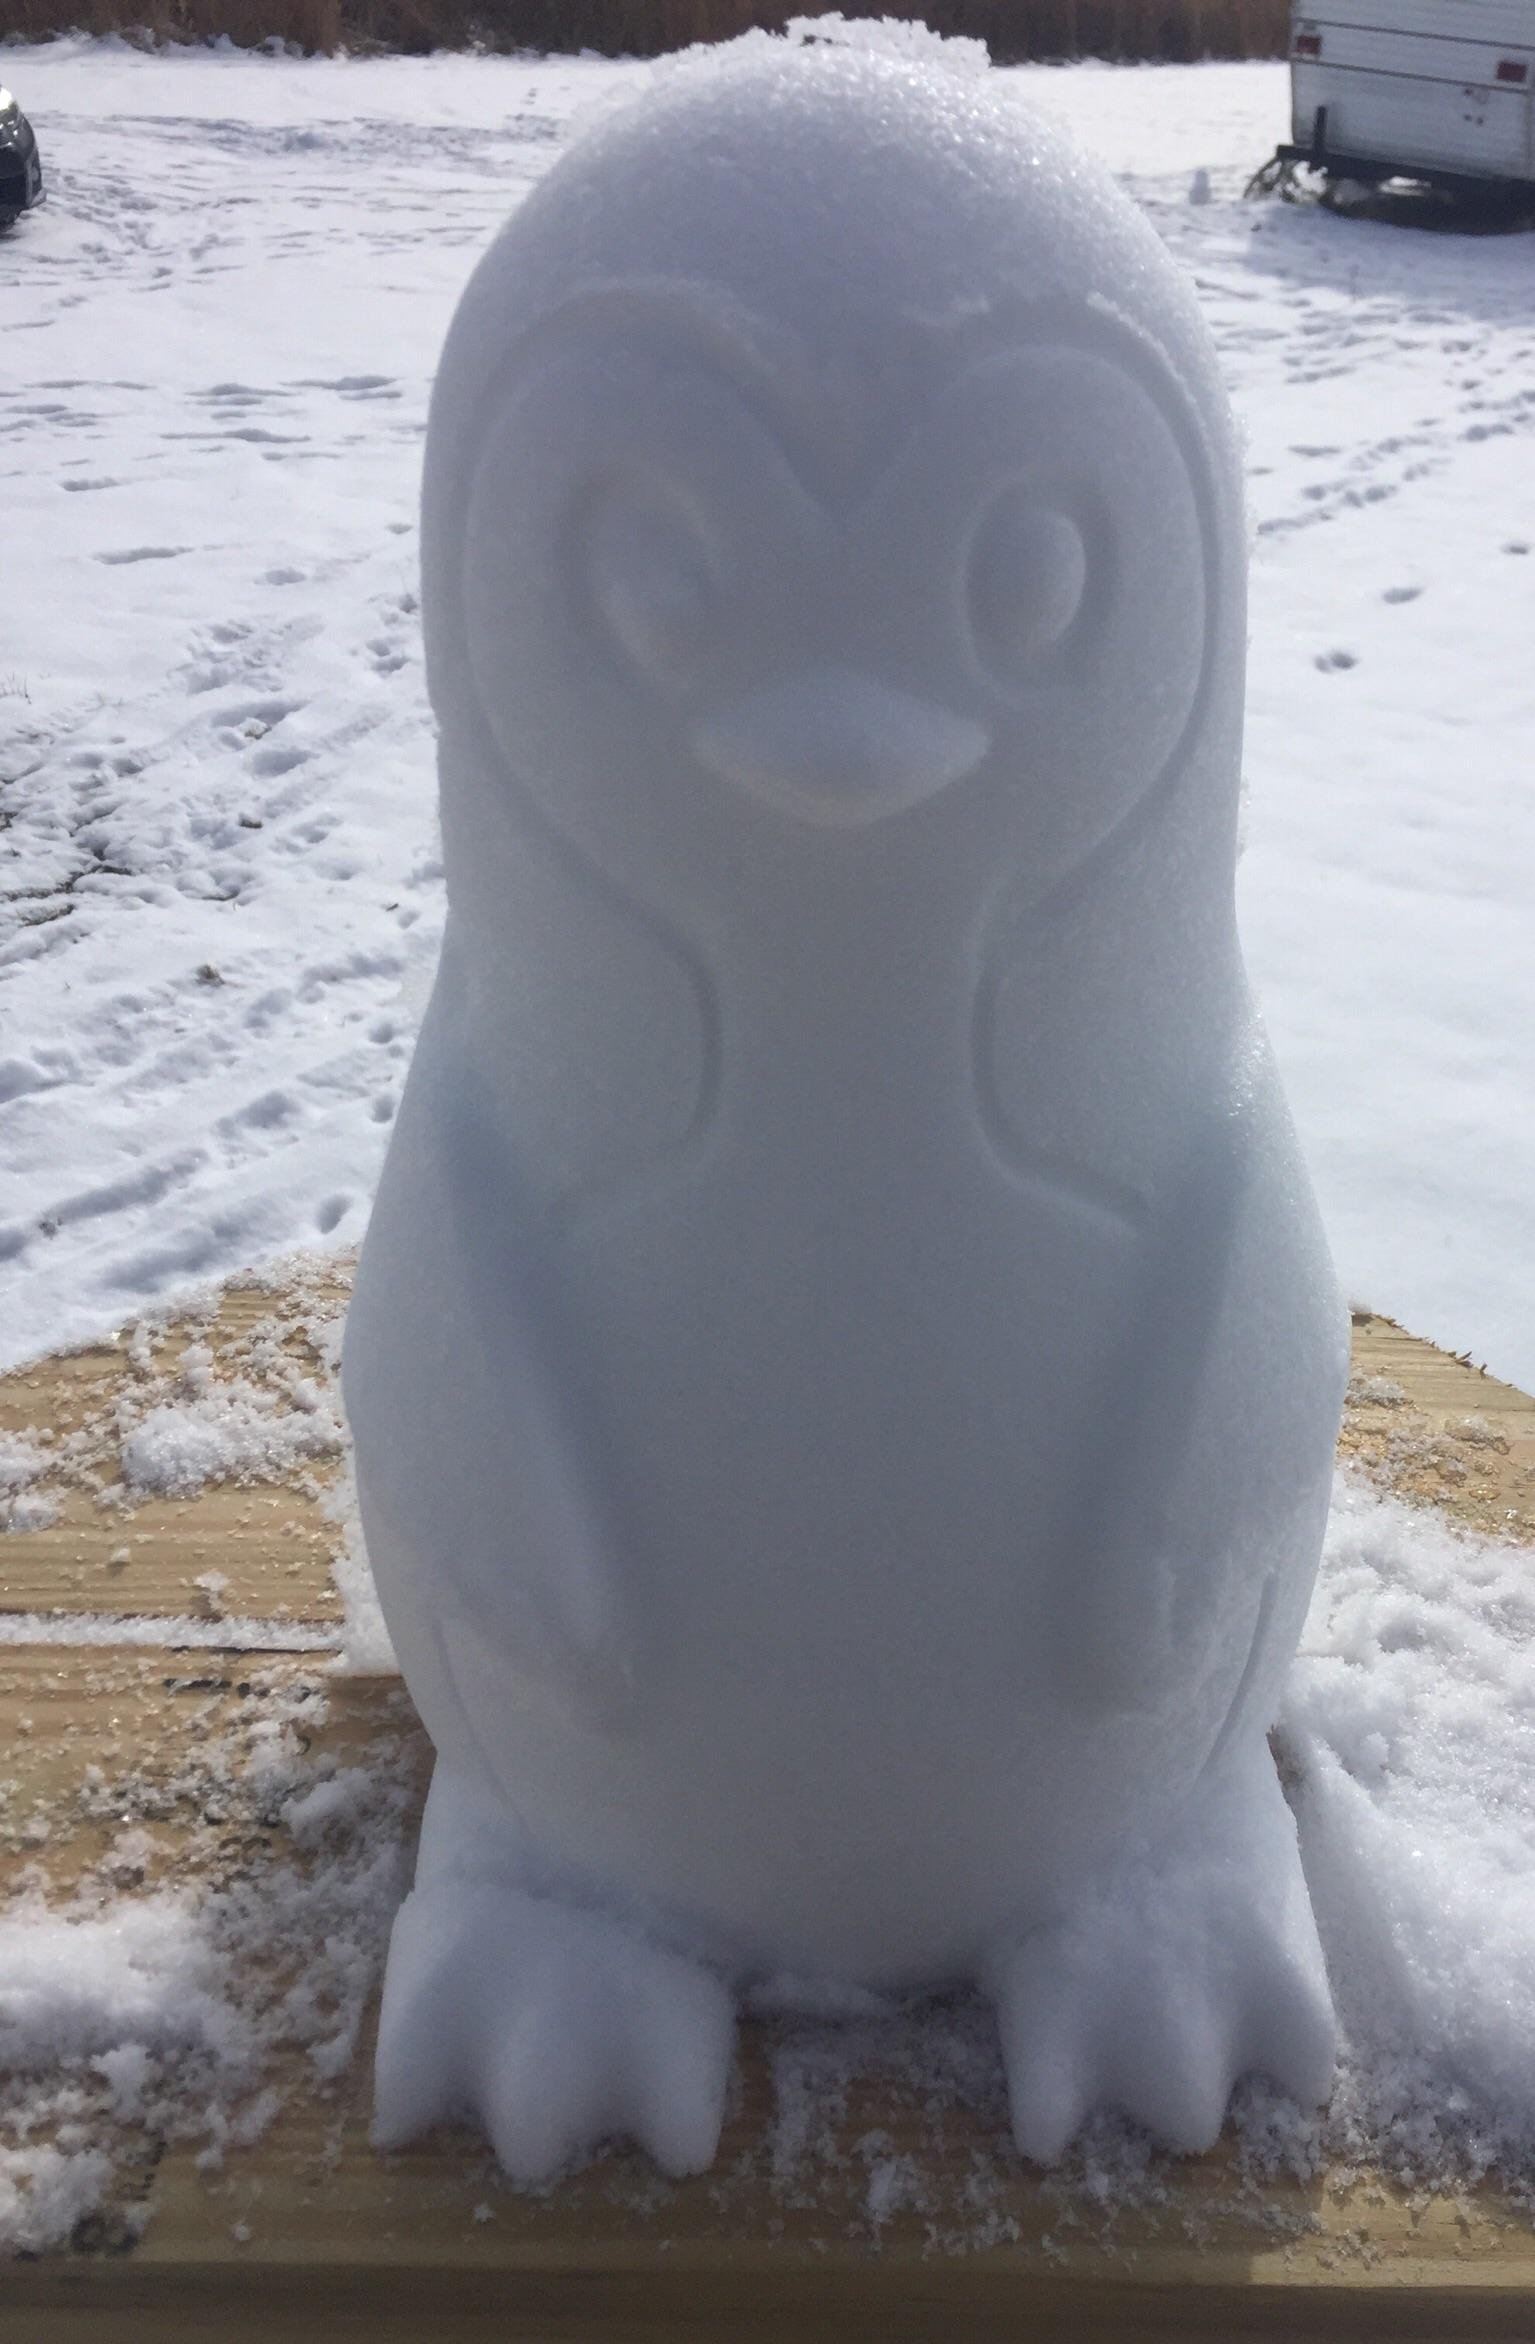 Having so much fun playing outside in the snow this morning and I MADE A SNOW PENGUIN! There is now a mini army of Snow Penguins in my yard, hehe. 